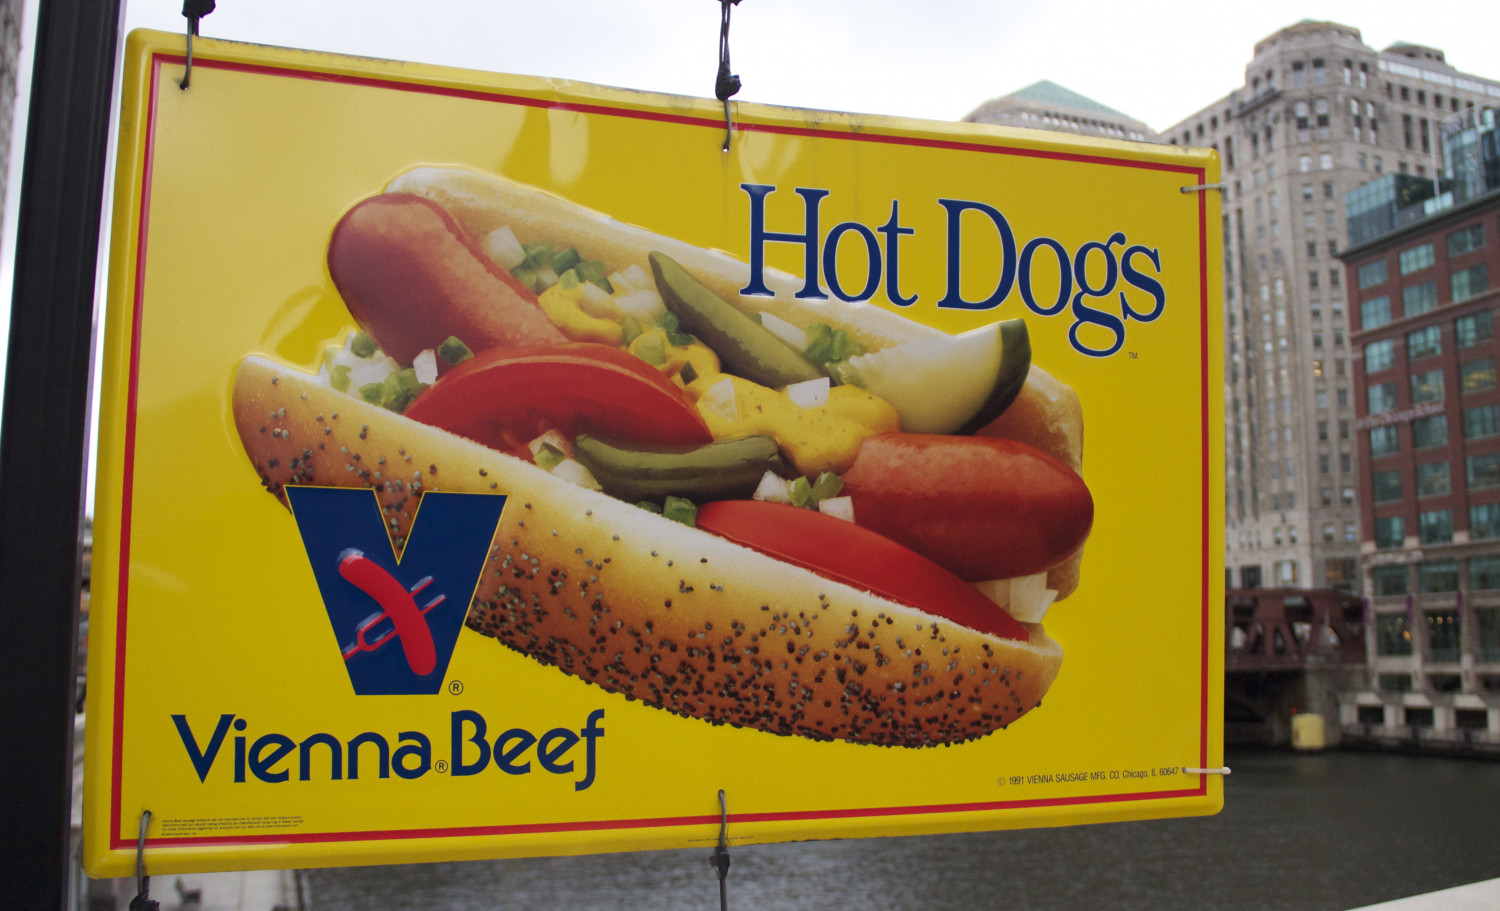 Vienna Beef Recalls Products Due to Possible Metal Contamination